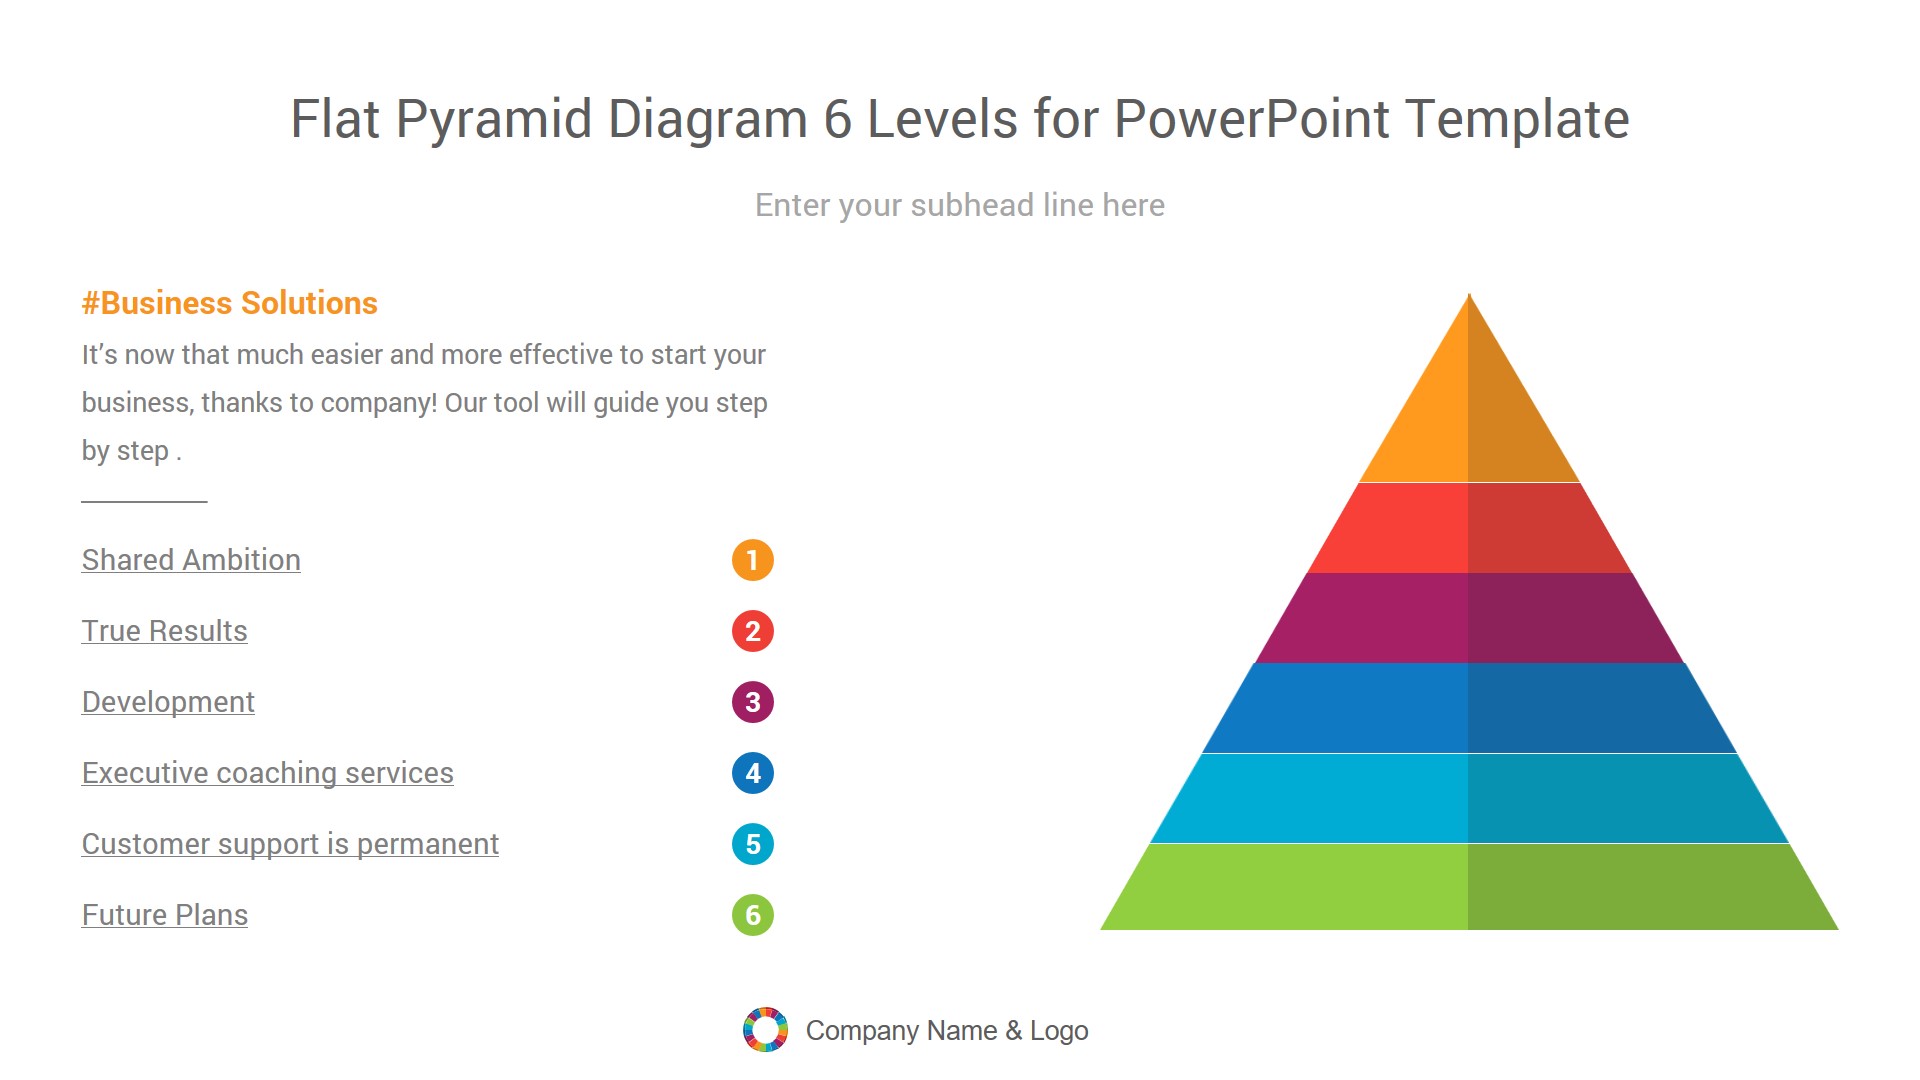 flat pyramid diagram six levels for powerpoint template CiloArt